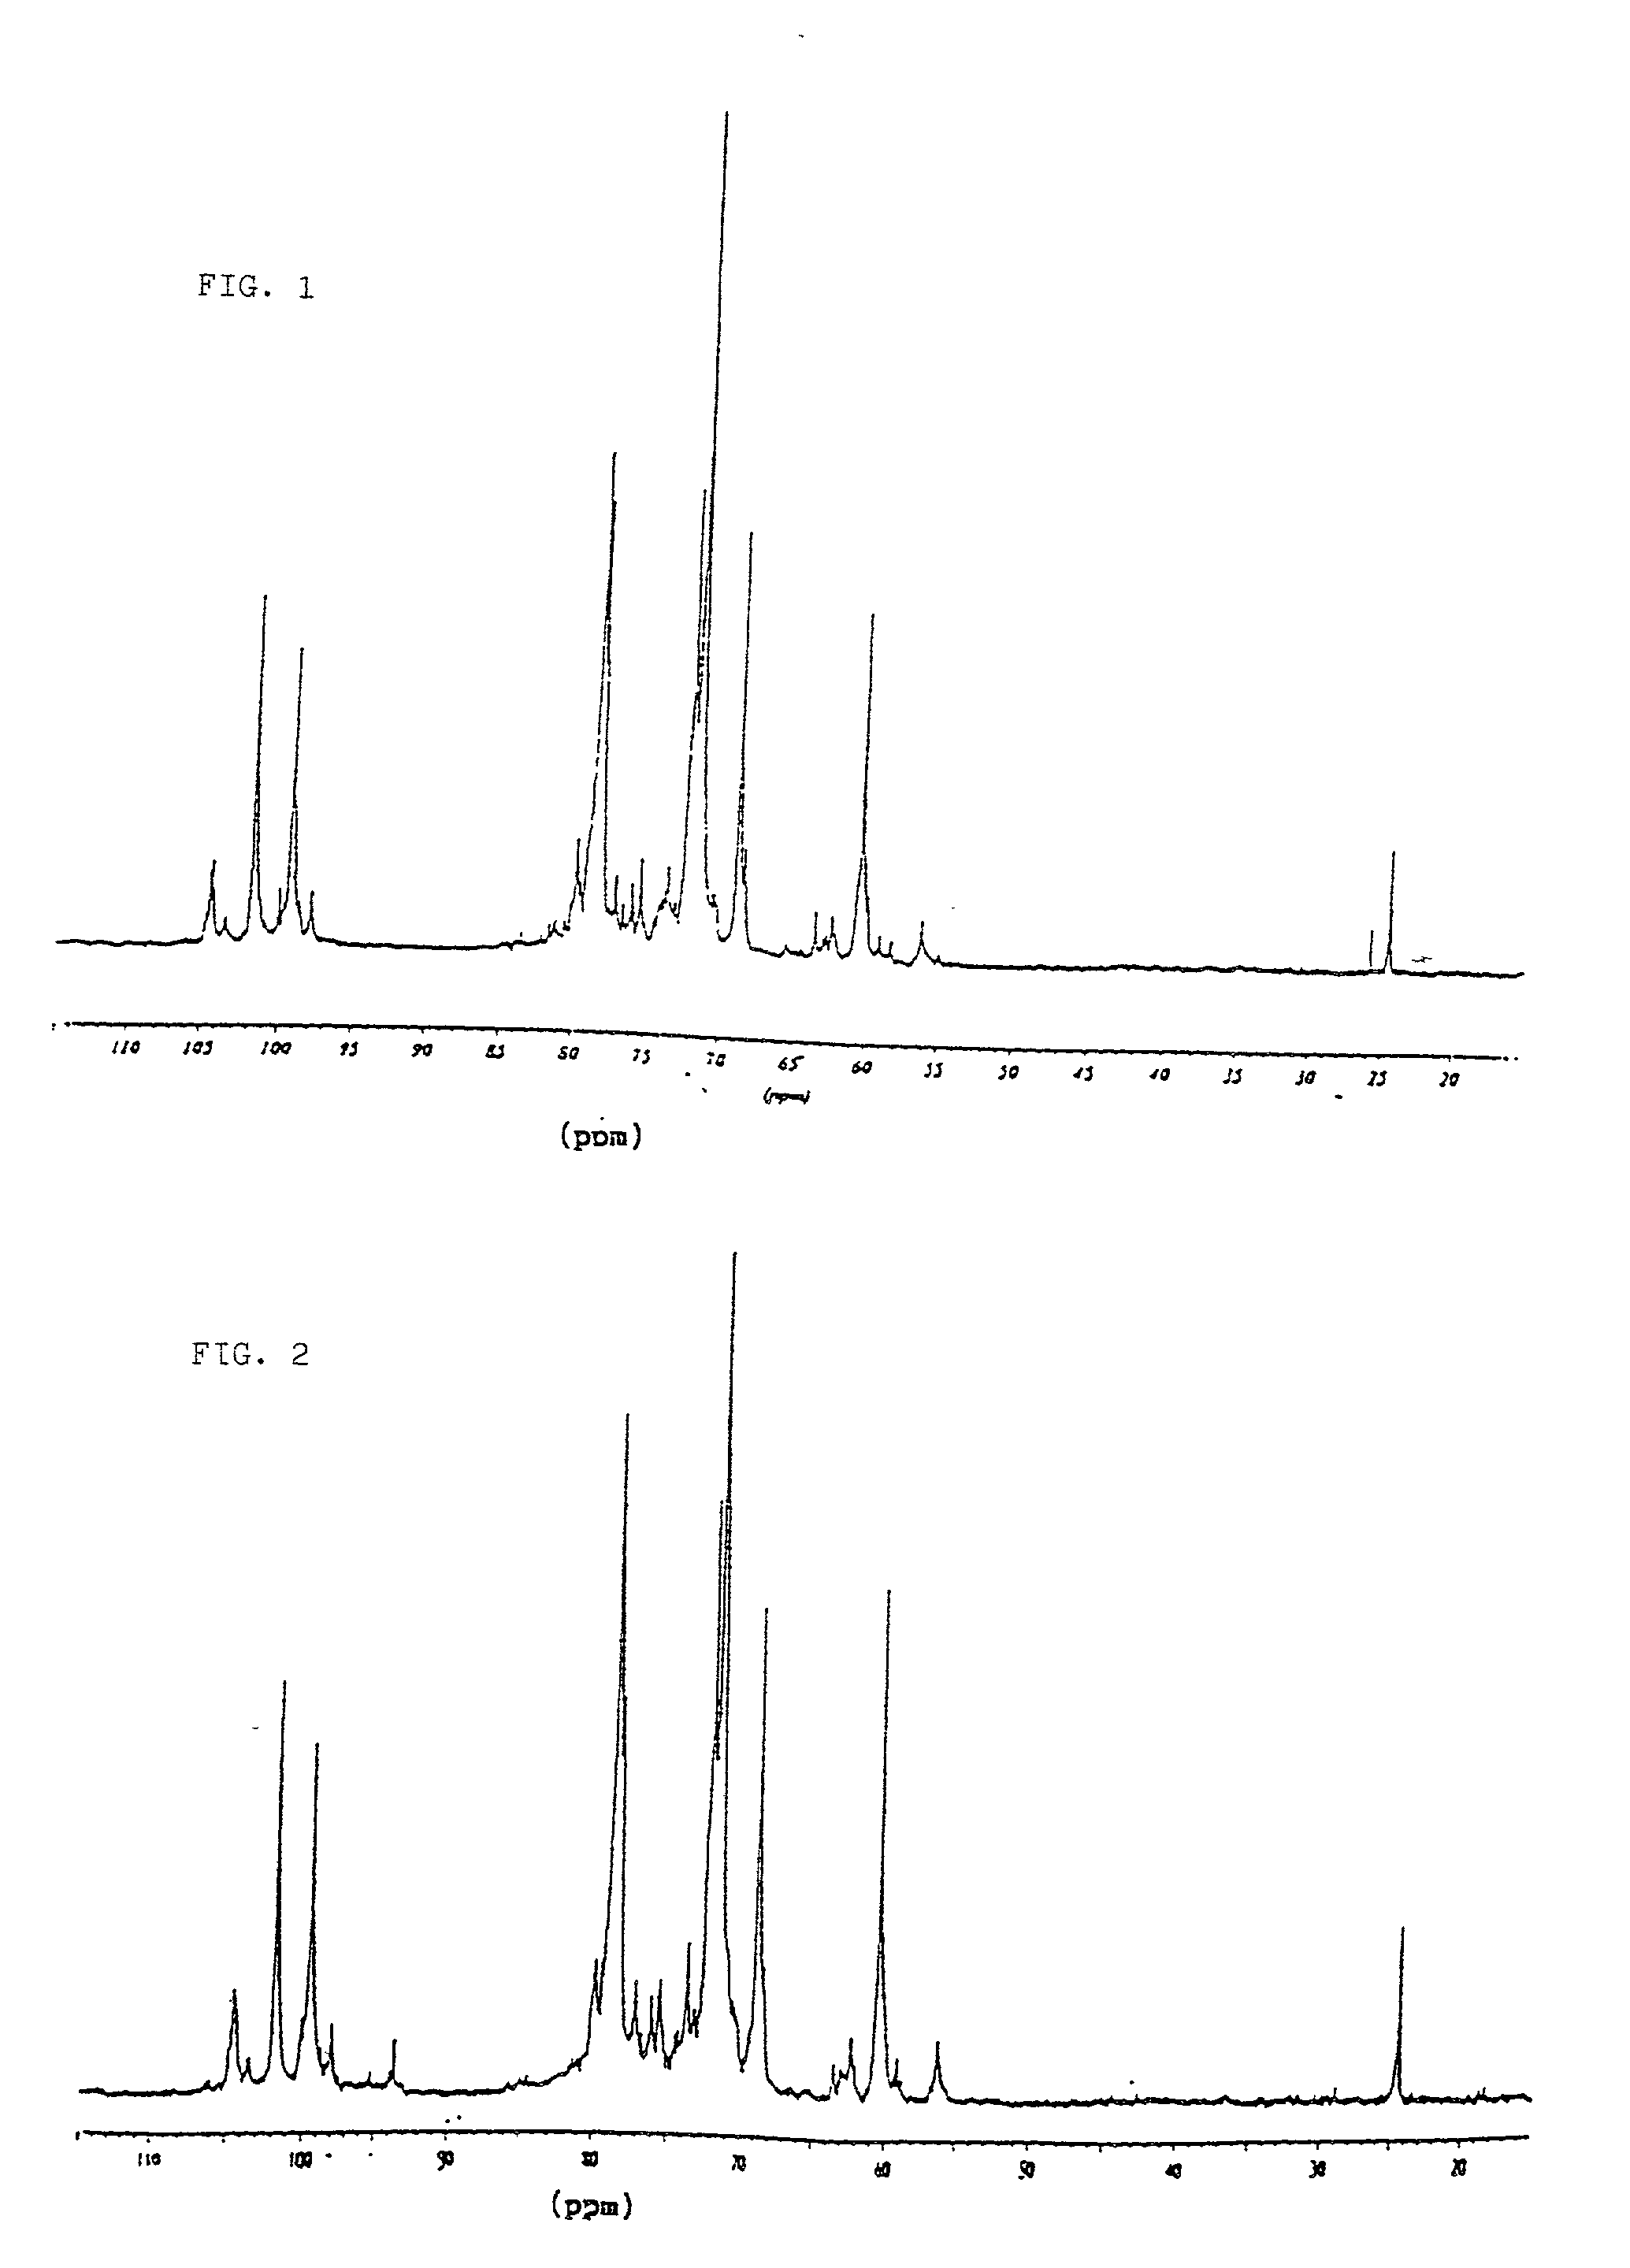 Composition consisting of heparin fractions having reproducible characteristics with average molecular weight equal to 5200d